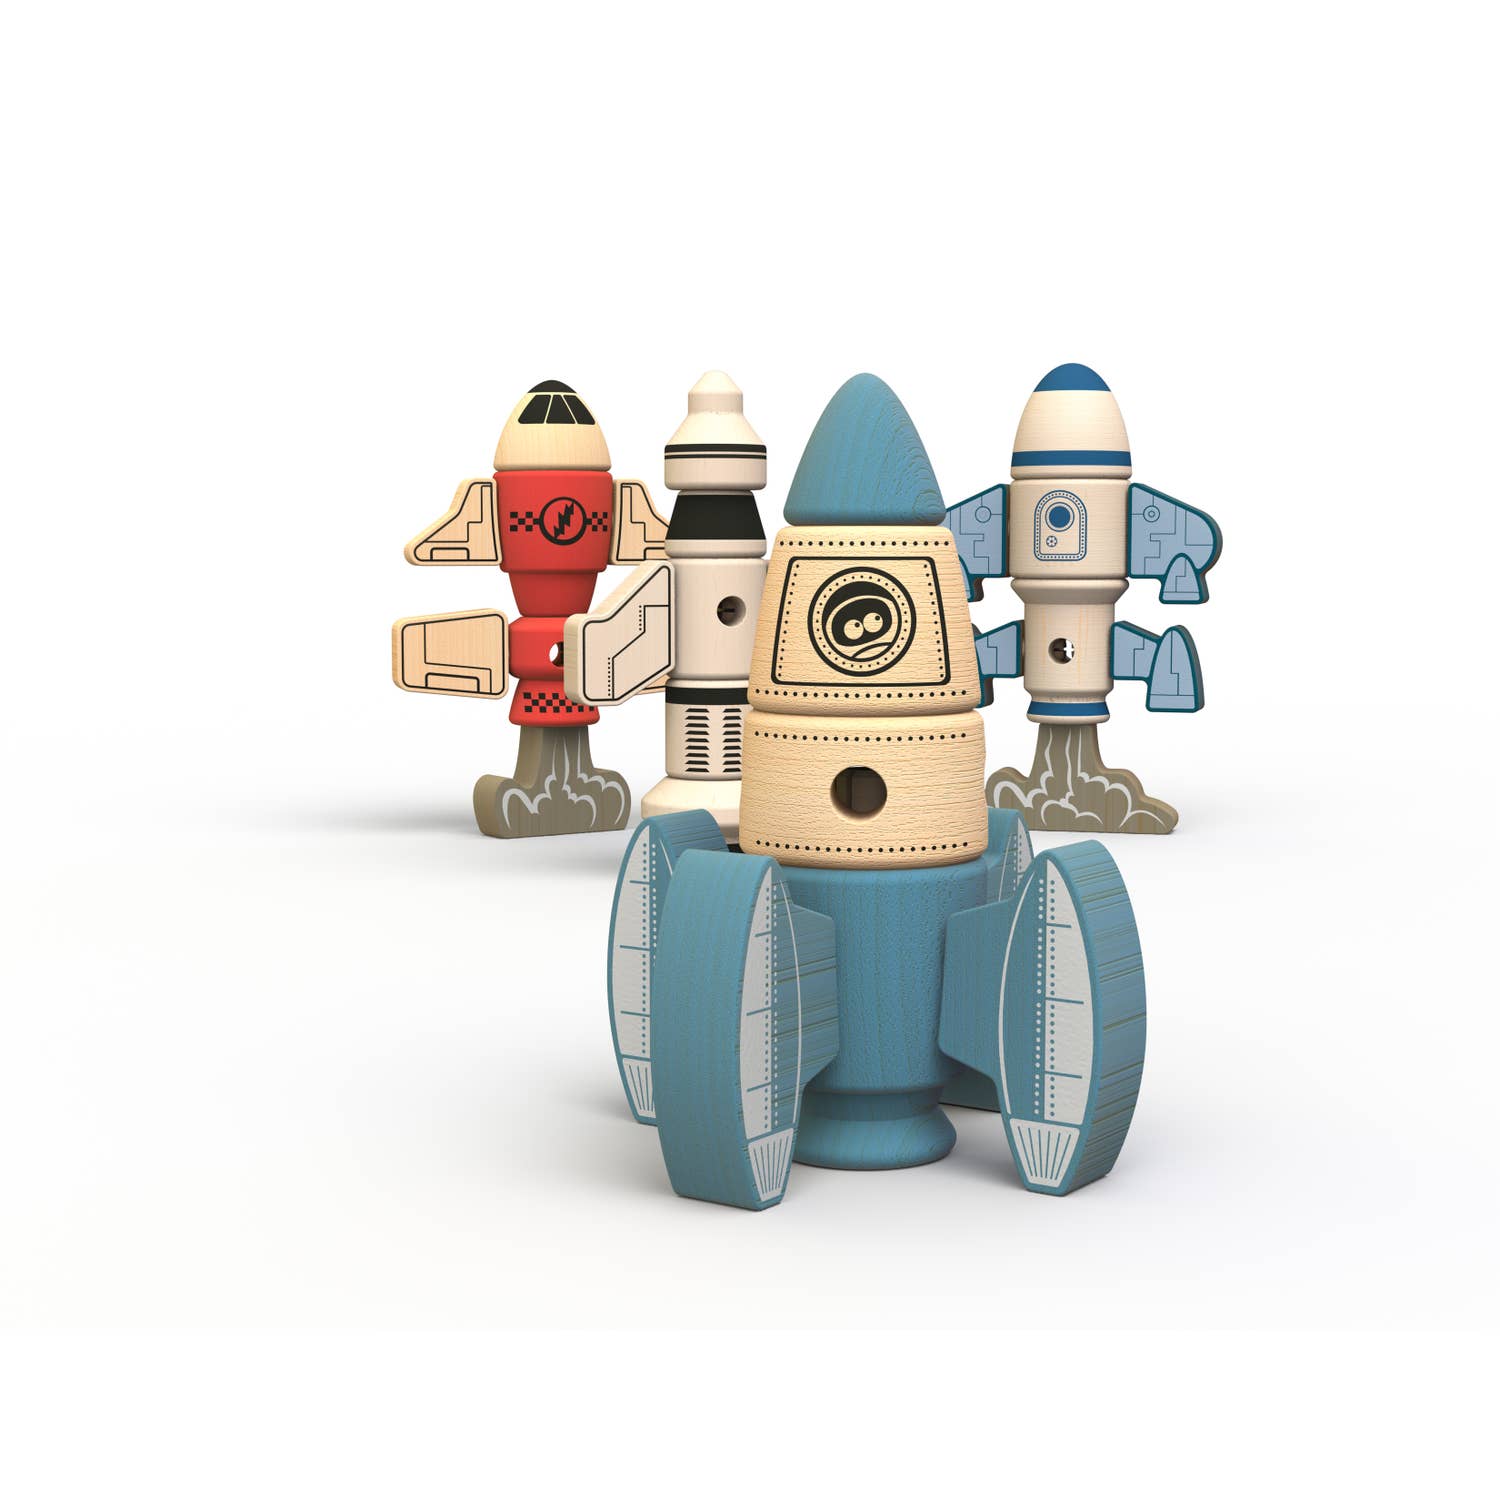 Tinker Totter Rockets - 31 Piece Character Set